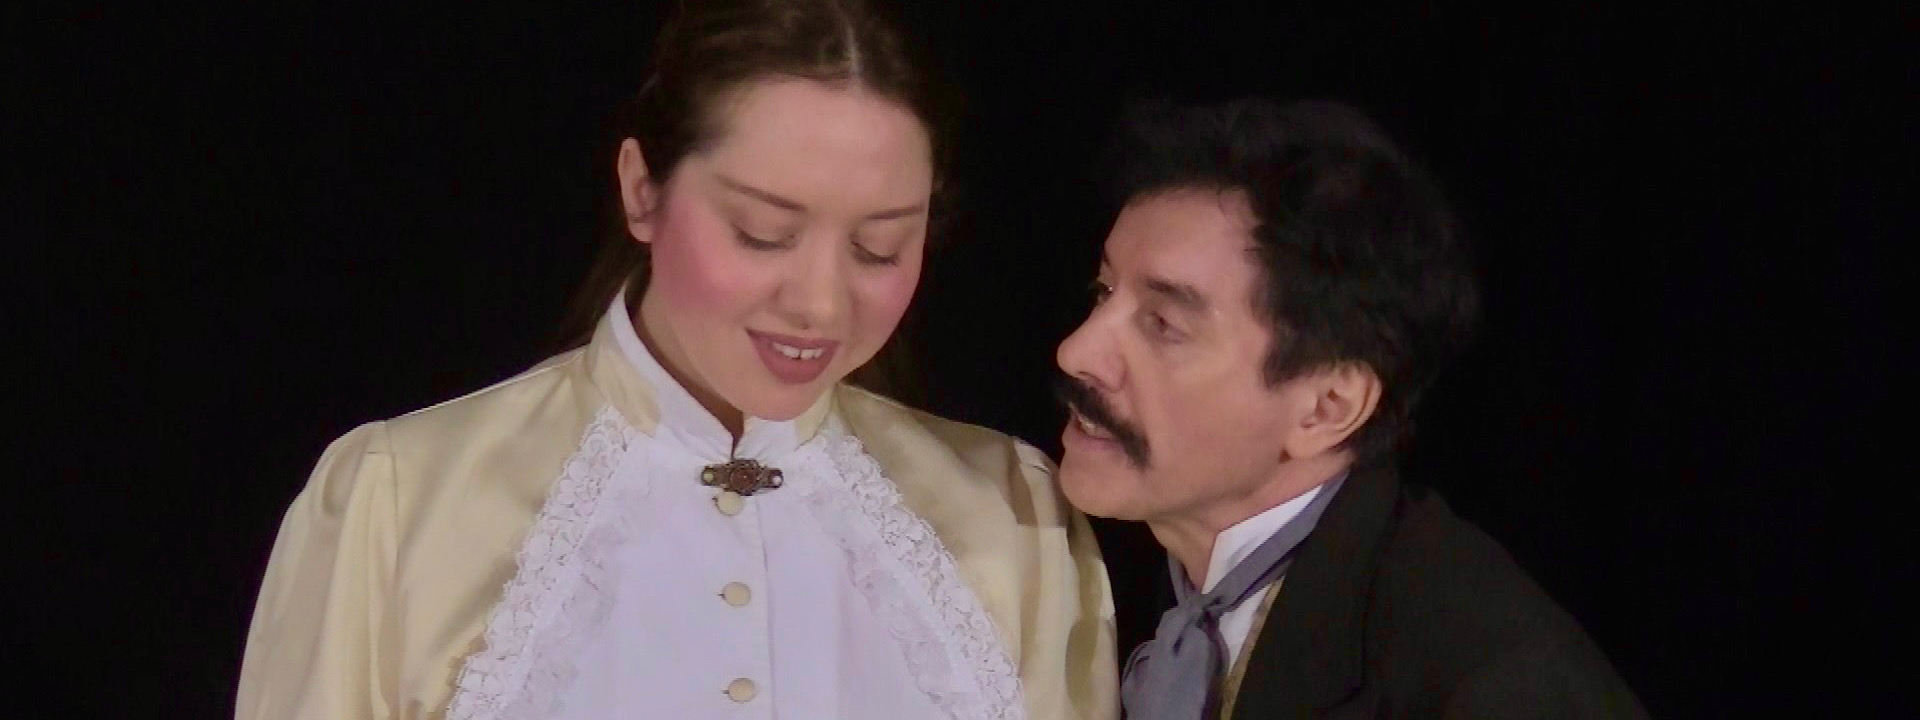 THE REVIEWS ARE IN “The Confession of John Wilkes Booth” – A Stage to Film Production Is a Hit!